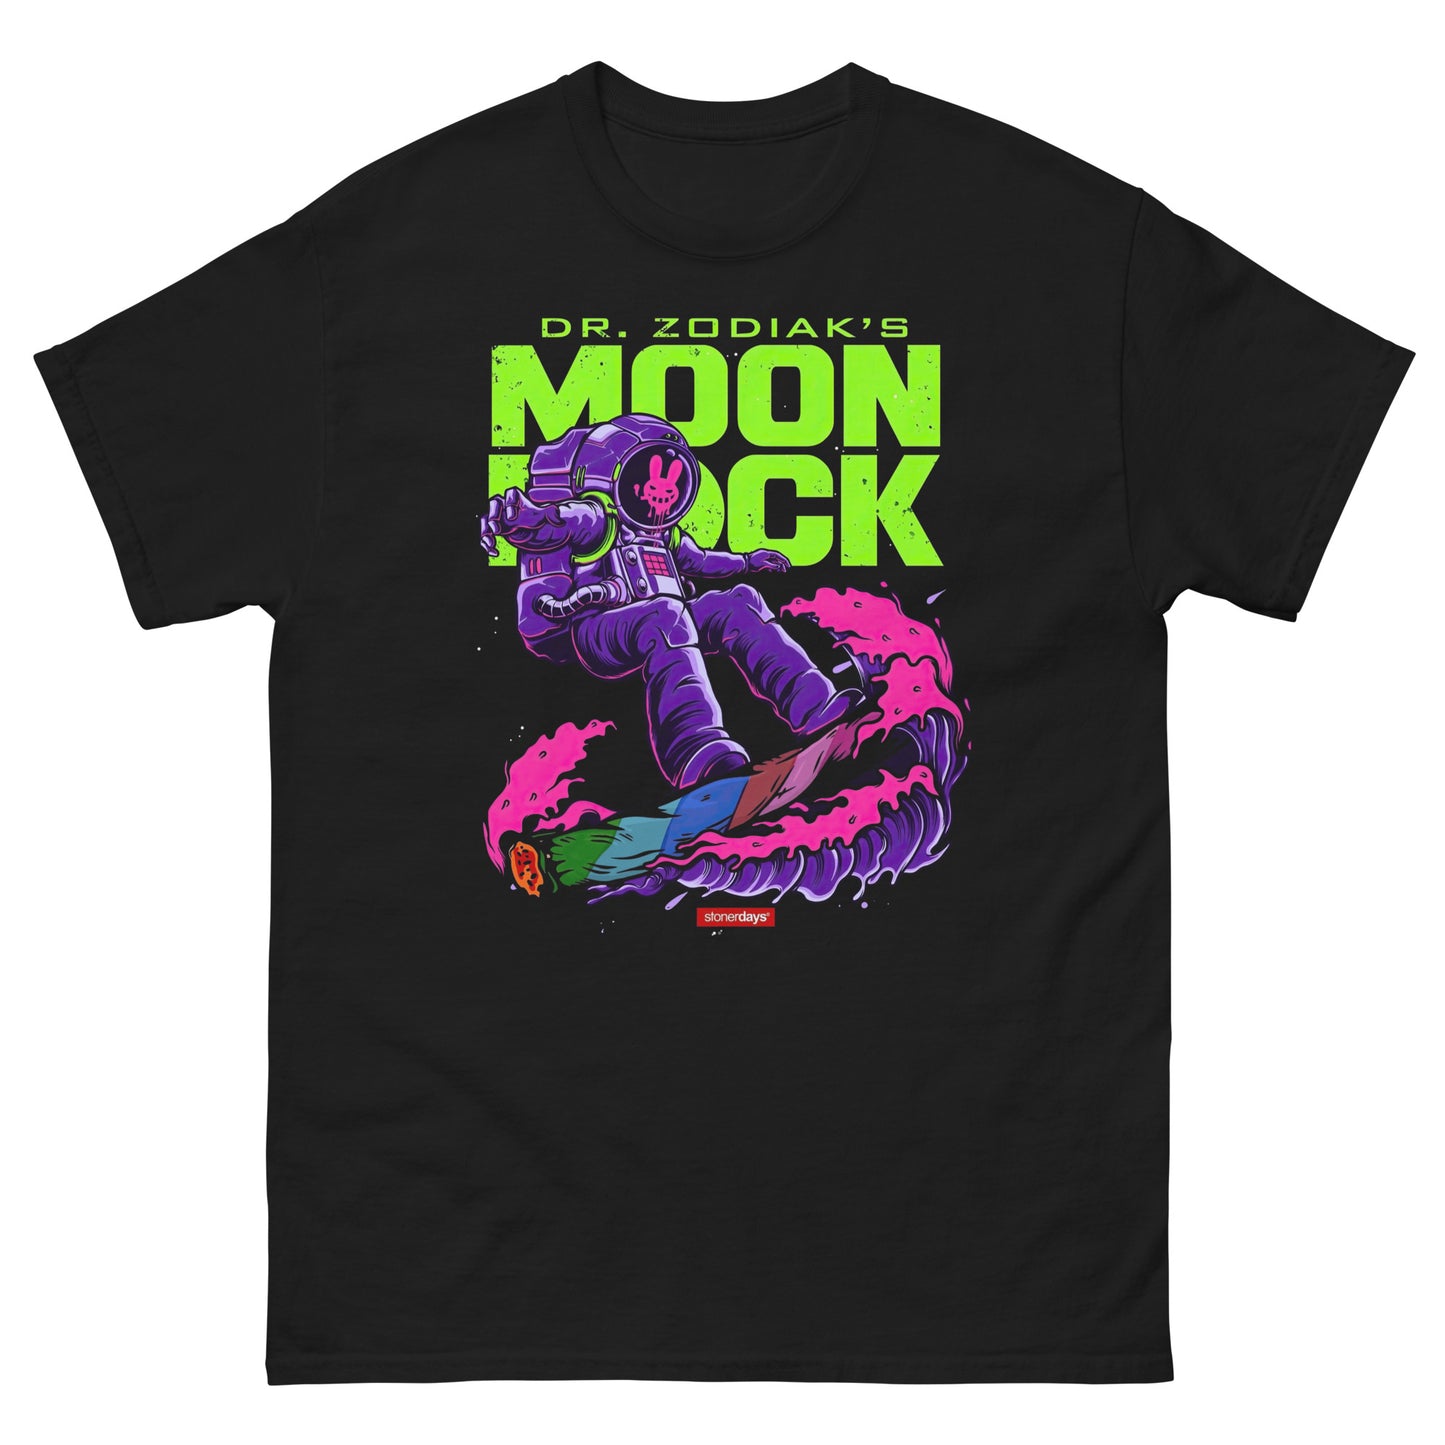 Space Surf Tee by Dr. Zodiak's Moonrock